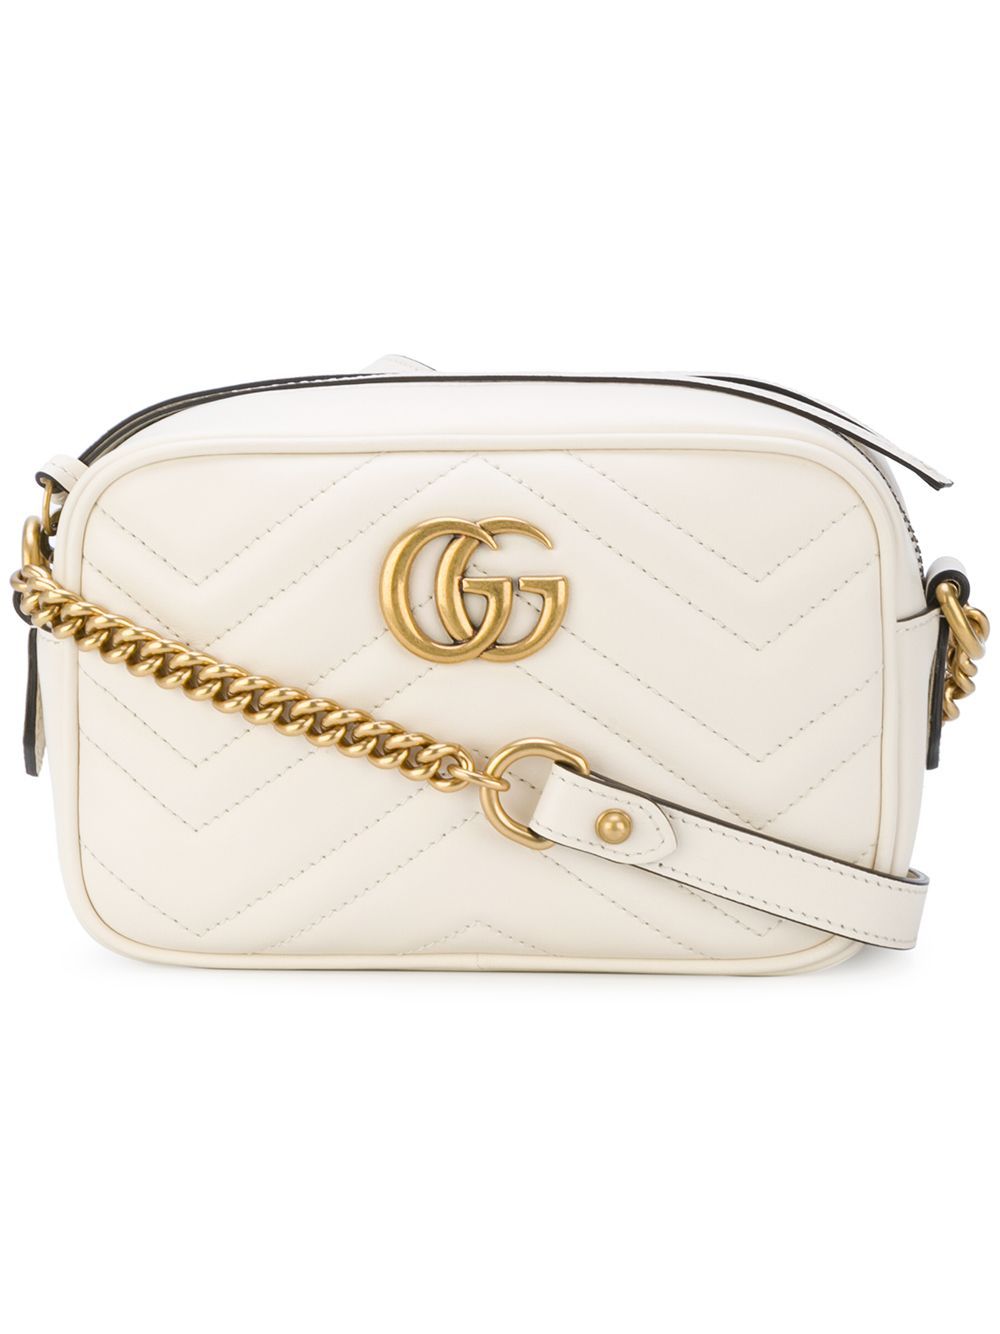 Gucci White GG Marmont Leather cross body bag - Nude & Neutrals | FarFetch US